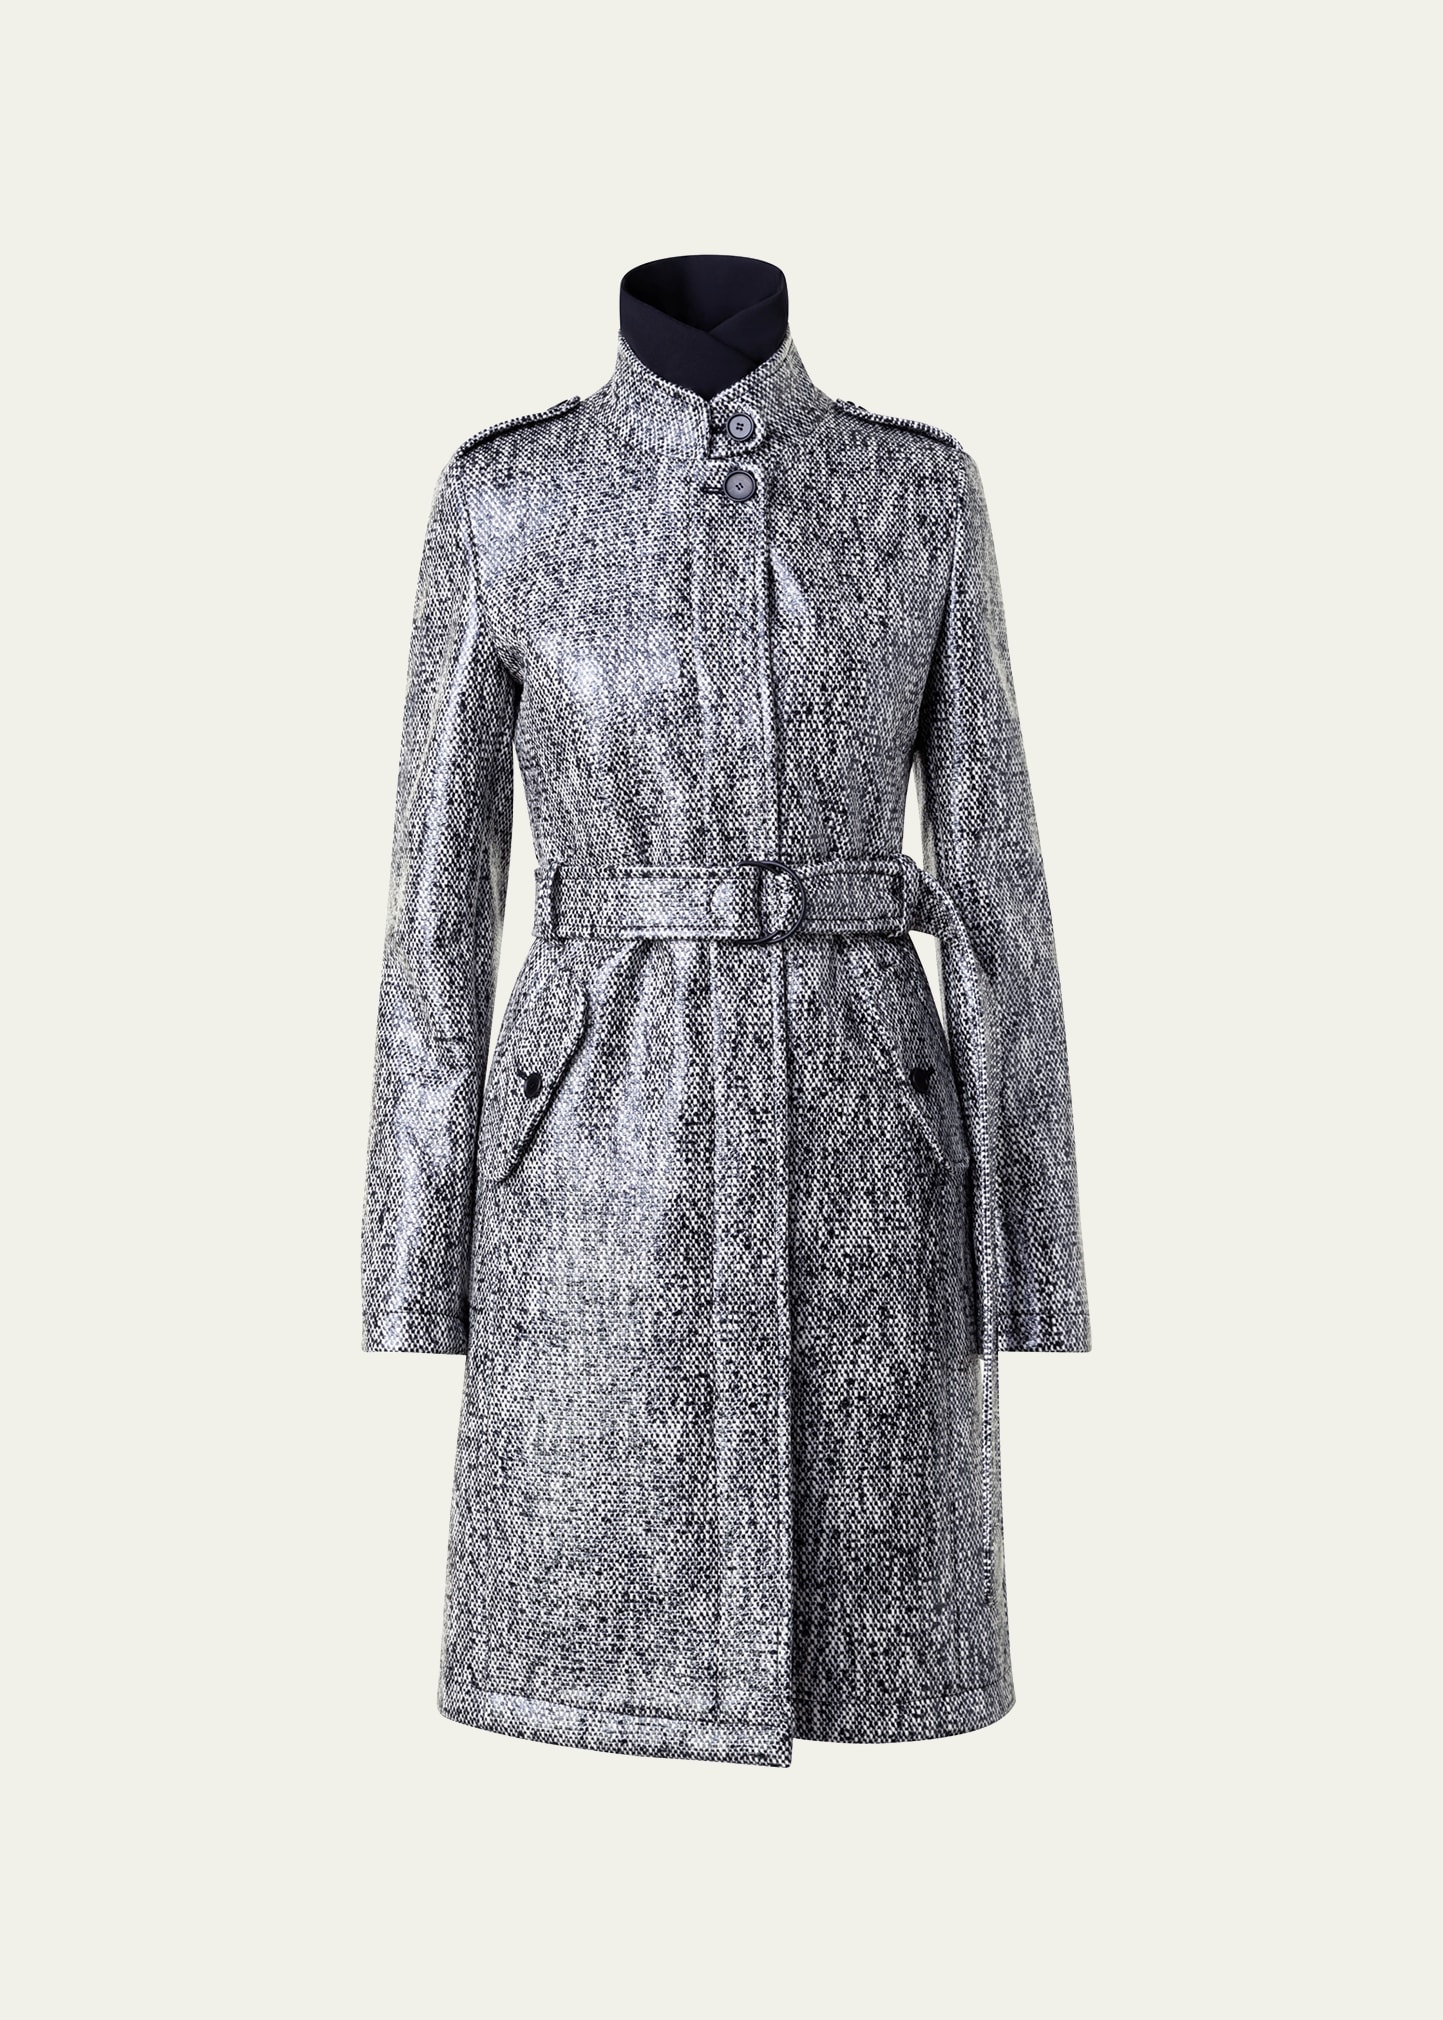 AKRIS PUNTO LACQUERED TWEED TOP COAT WITH REMOVABLE QUILT INSERT